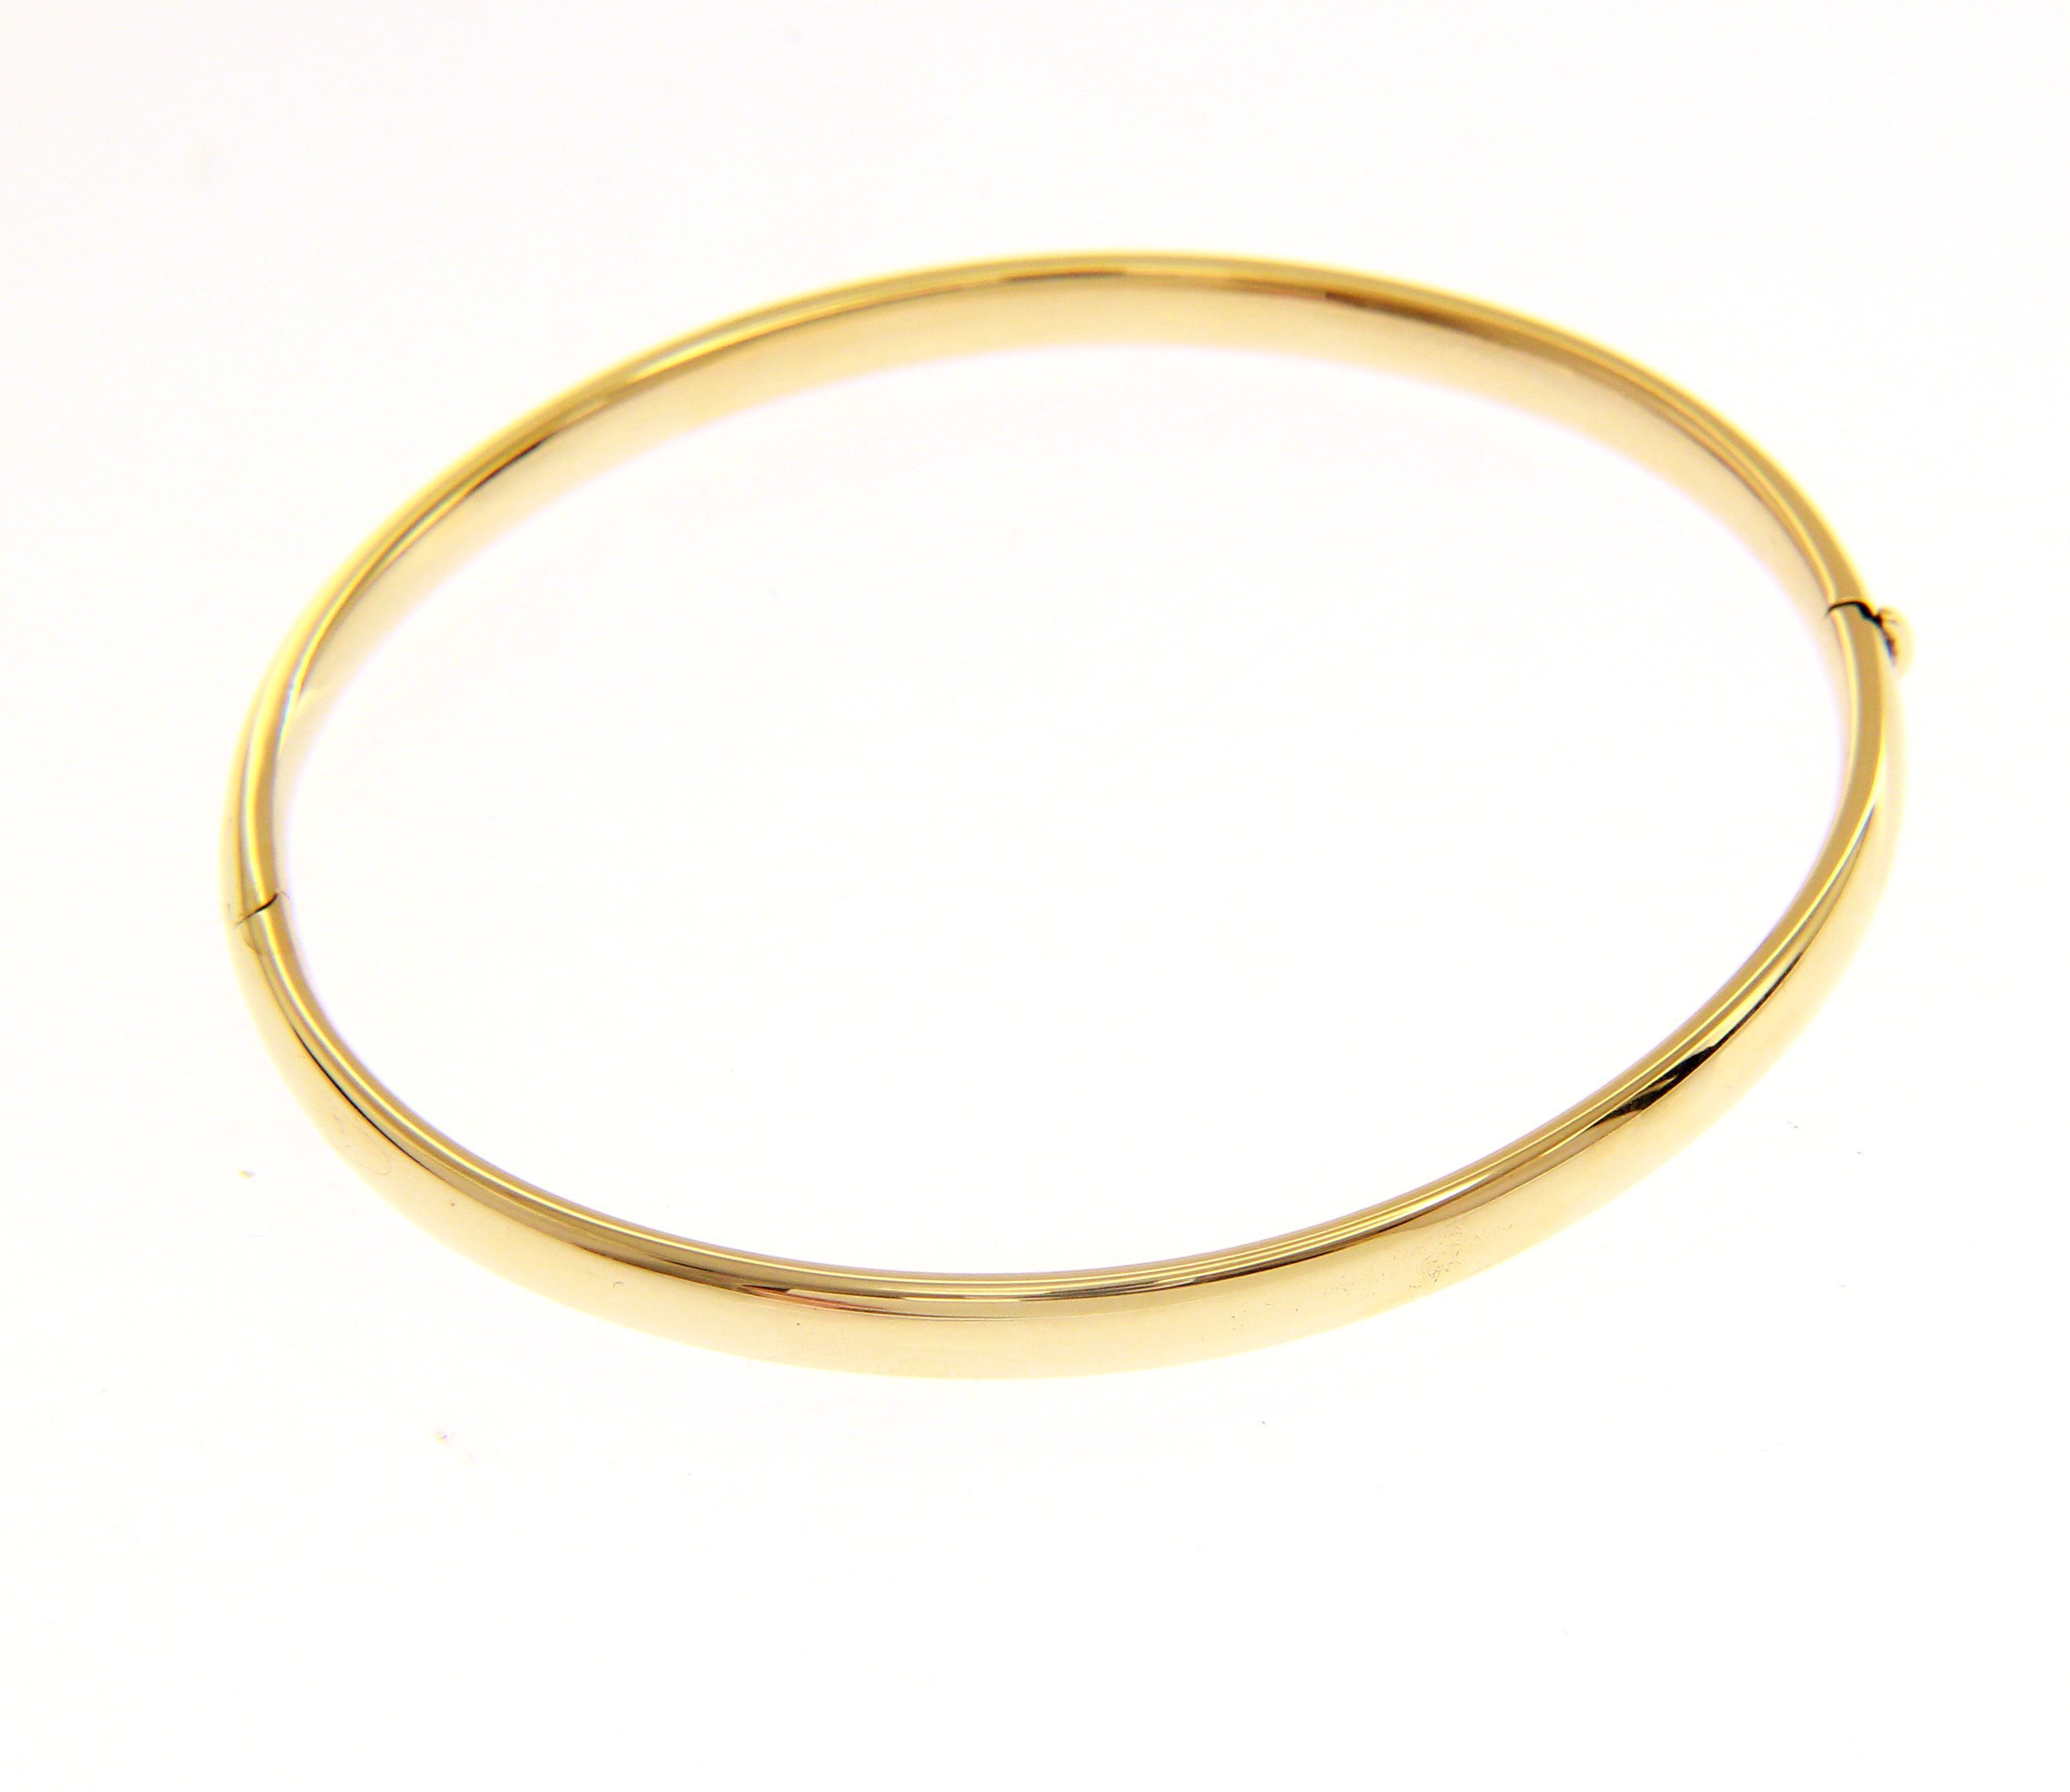 Golden oval bracelet with clasp k14 (code S205073)